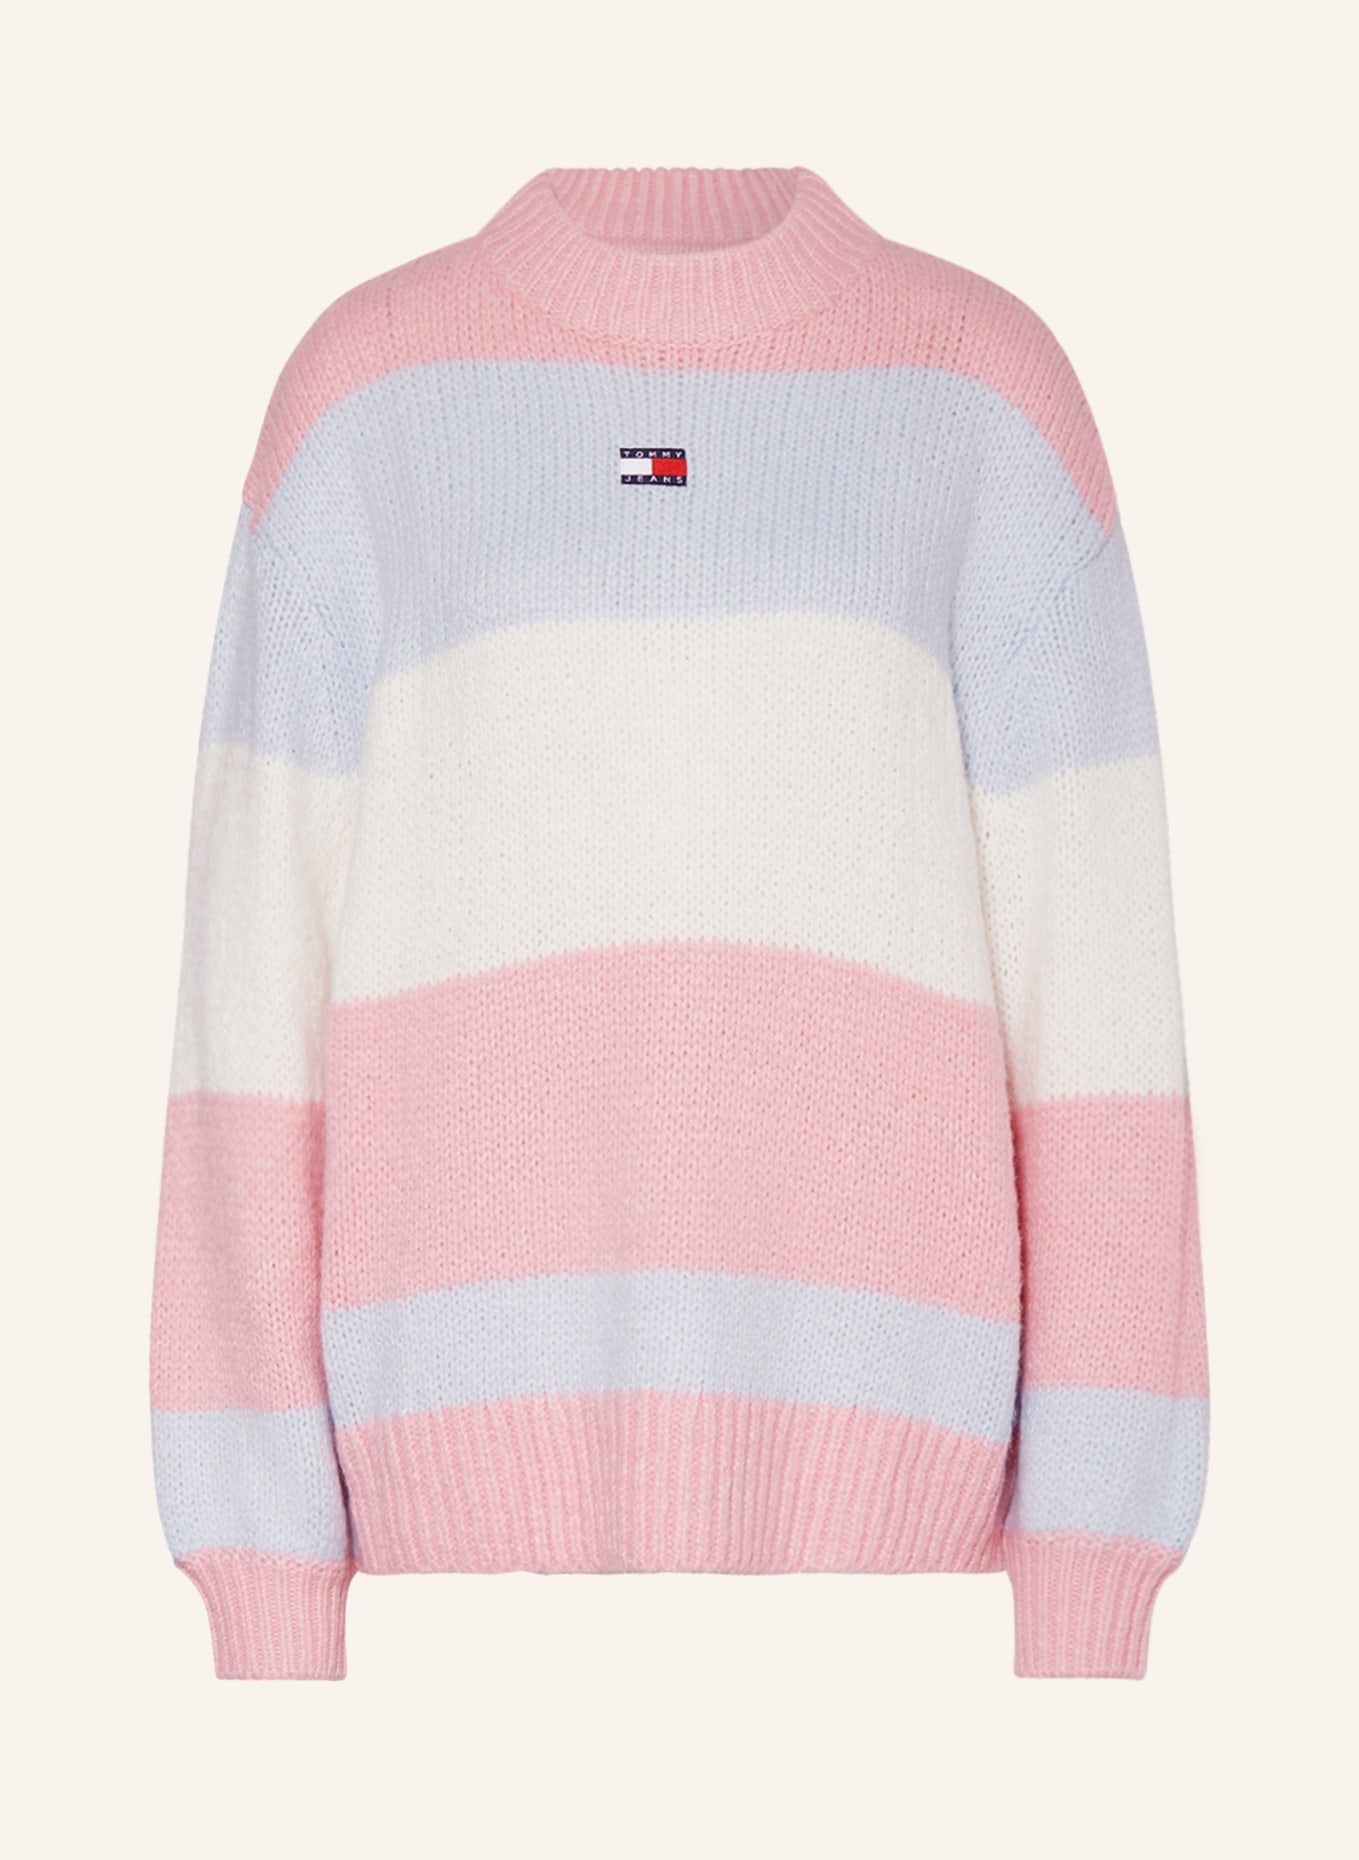 TOMMY JEANS Pullover, Farbe: ROSA/ HELLBLAU/ WEISS (Bild 1)